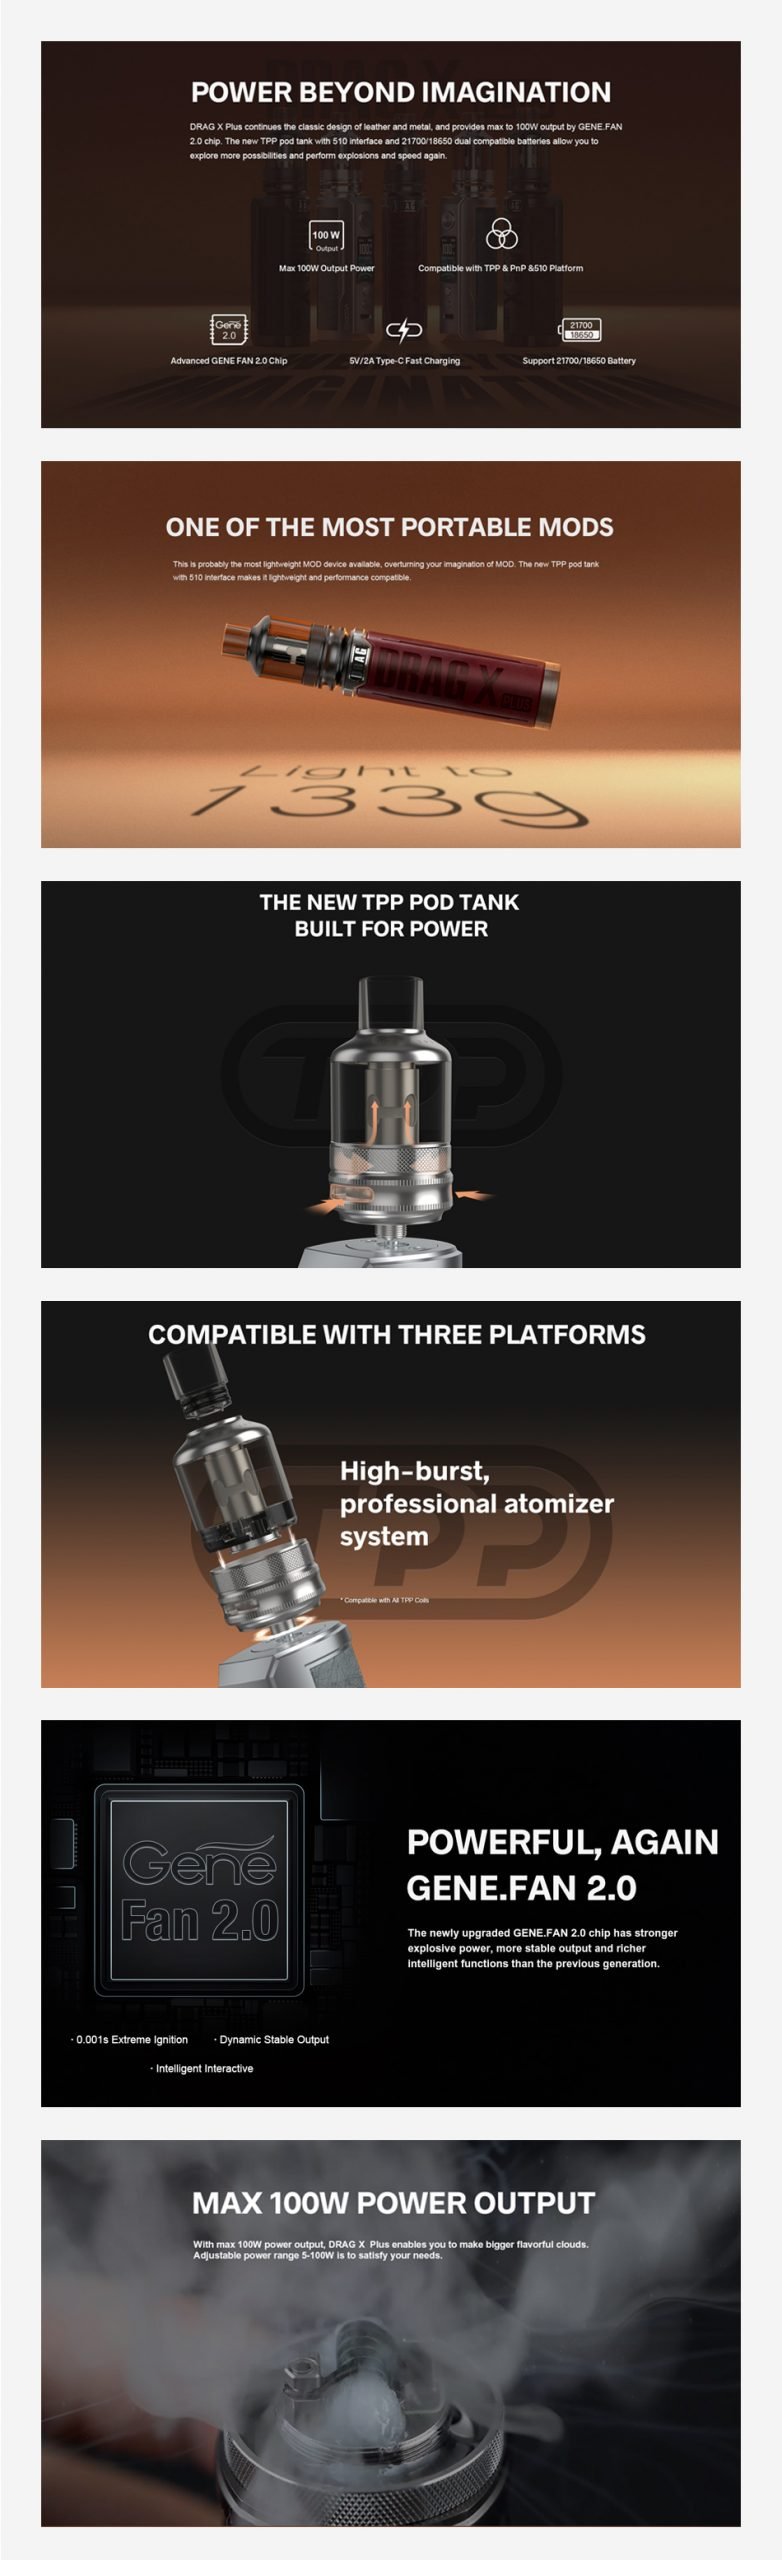 Voopoo Drag X Plus Kit Features - 6-part promotional image: Image reads: Power Beyond Imagination: The Drag X Plus continues the classic design of leather and metal, and provides max to 100W output by GENE.FAN 2.0 chip. The new TPP pod tank with 510 interface and 21700/18650 dual compatible batteries allow you to explore more possibilities and perform explosions and speed again. Max 100W Output Power, Compatible with TPP & PnP & 510 Platform, Advanced GENE.FAN 2.0 chip, 5V/2A Type-C Fast Chargin, Support 21700/18650 Battery. ONE OF THE MOST PORTABLE MODS This is probably the most lightweight MOD device available, overturning your imagination of MOD. The new TPP pod tank with 510 interface makes it lightweight and performance compatible THE NEW TPP POD TANK BUILT FOR POWER COMPATIBLE WITH THREE PLATFORMS High-burst, professional atomizer system Compatible with a TPP Coil POWERFUL, AGAIN GENE.FAN 2.0 The newly upgraded GENE.FAN 2.0 chip has stronger explosive power, more stable output and richer intelligent functions than the previous generation. 0.001s Extreme Ignition, Dynamic Stable Output, Intelligent Interactive MAX 100W POWER OUTPUT With max 100W power output, DRAG X Plus enables you to make bigger flavorful clouds. Adjustable power range 5-100W is to satisfy your needs.